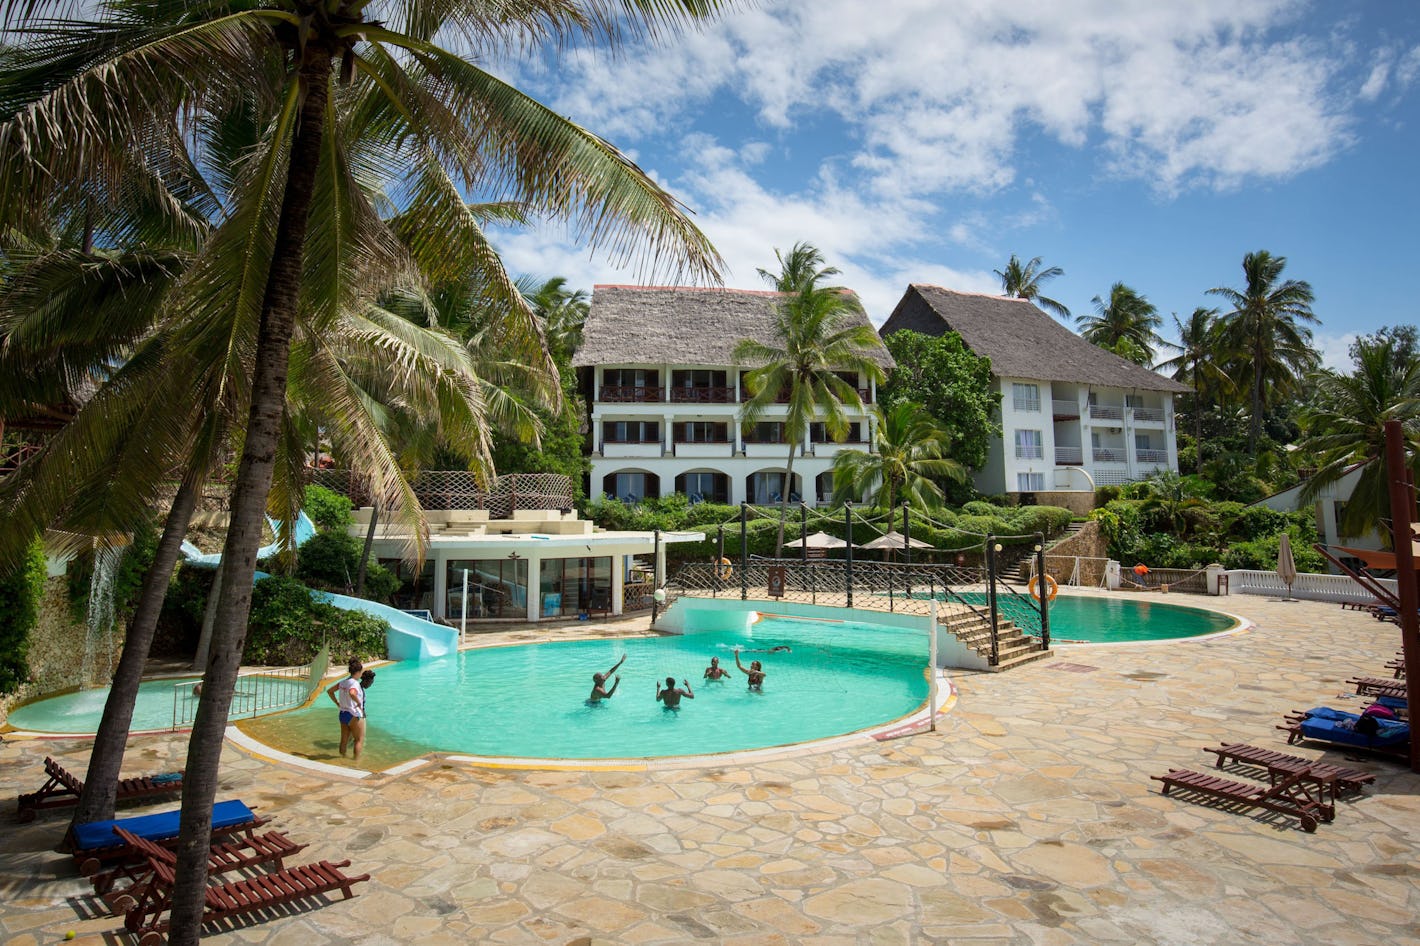 To escape the stresses of city life (or wind up your active safari in Kenya's exceptional bushscapes), a few days of beachfront fun may be just the change of pace your family needs.